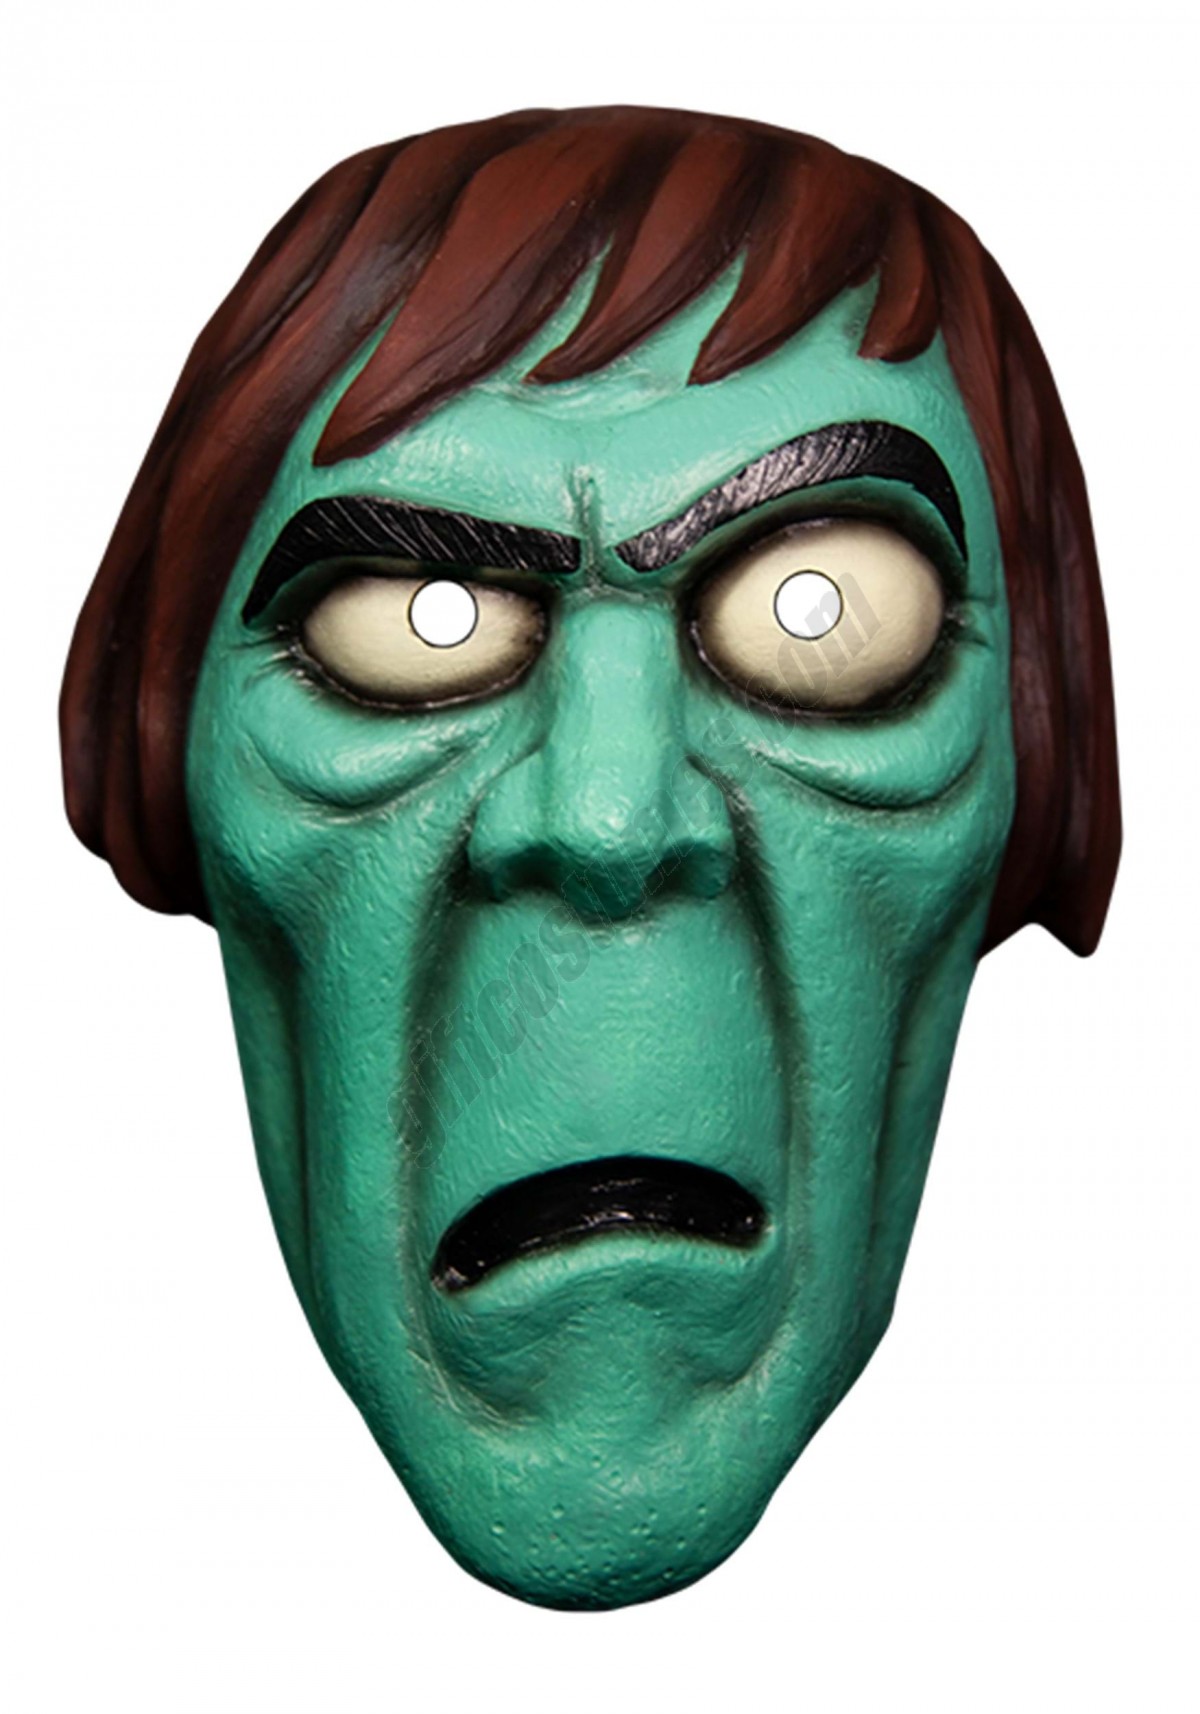 Scooby Doo Vacuform Mask of the Creeper  Promotions - -0